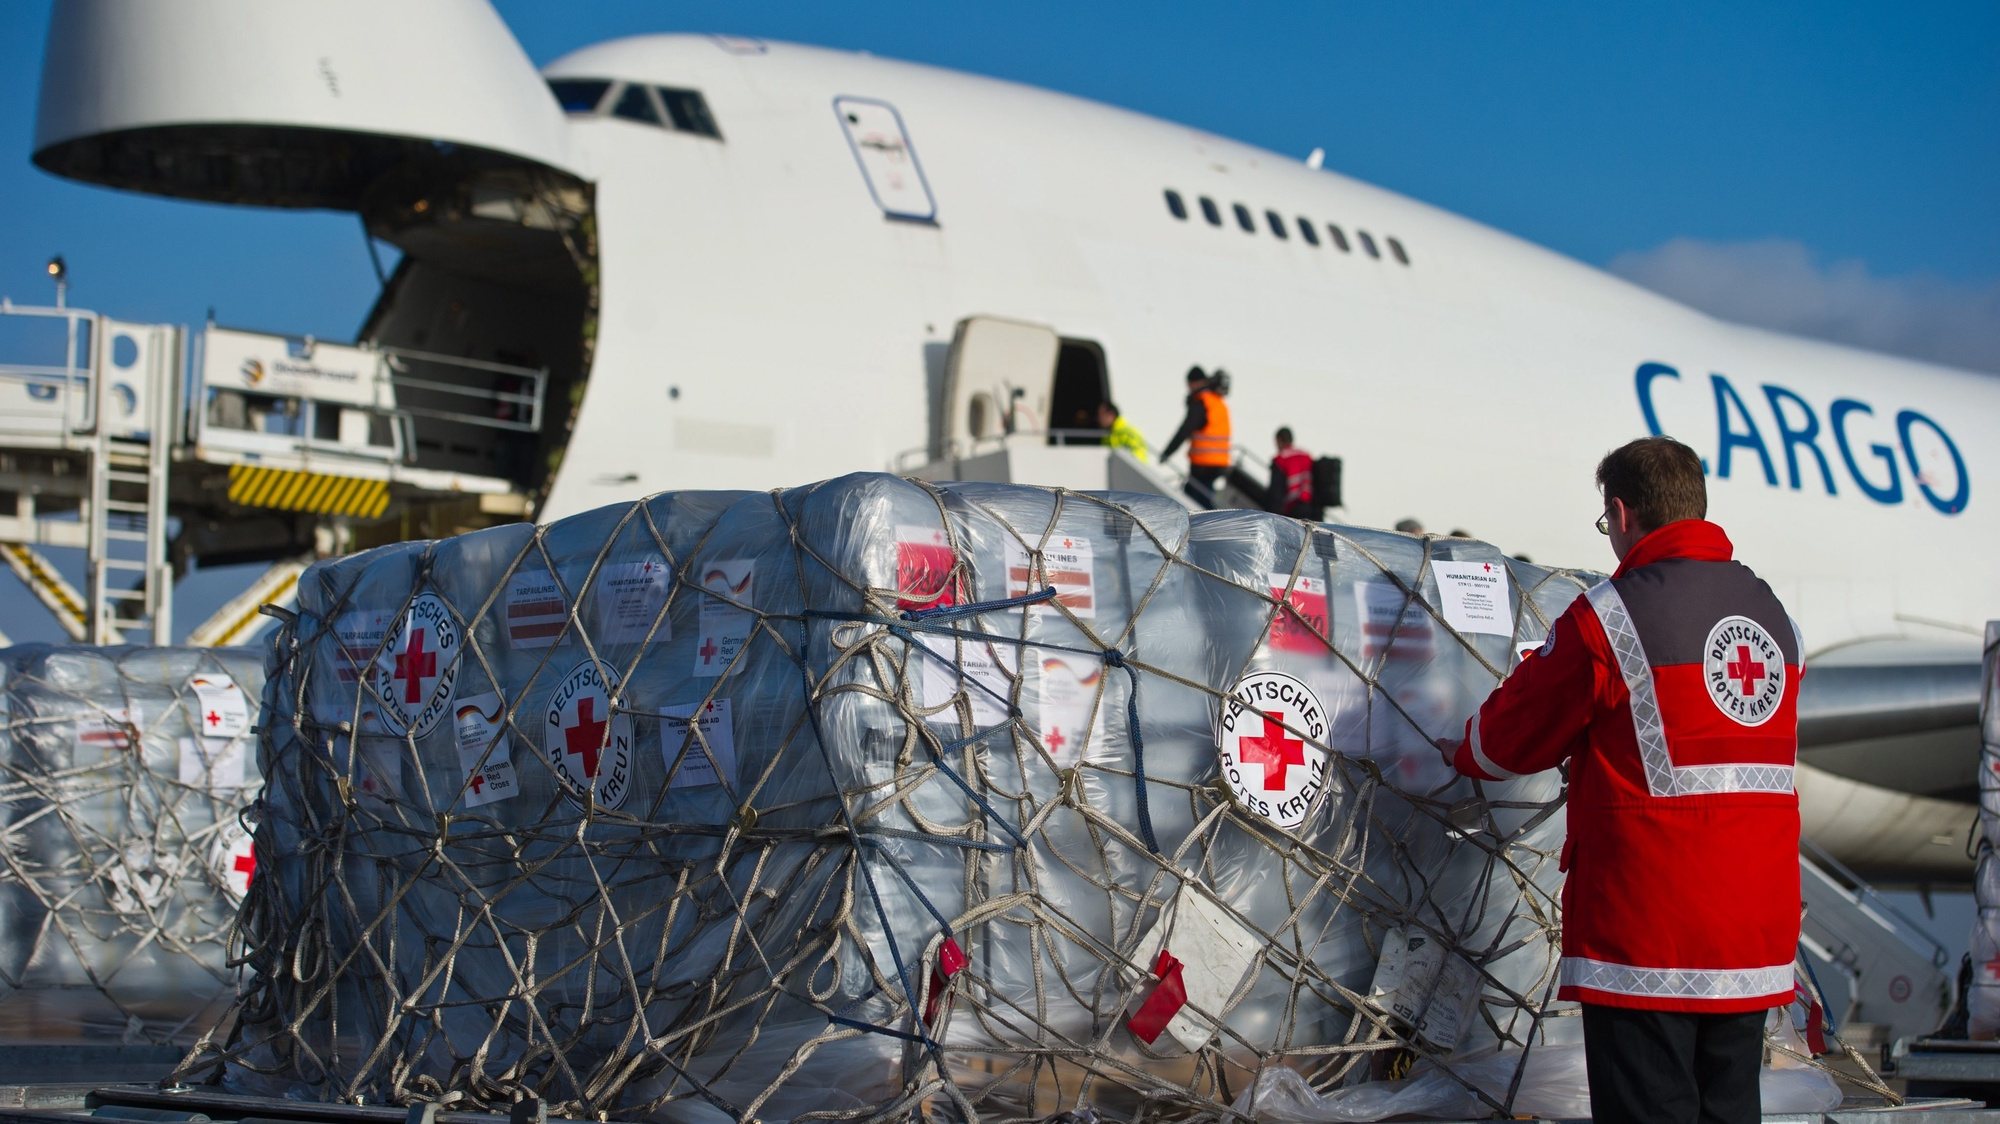 epa03947921 Relief supplies for the victims of the typhoon in the Philippines are loaded into an aircraft at Schoenfeld Airport in Schoenefeld, Germany, 13 November 2013. 70 tons of freight are sent by the German Red Cross and the Federal Agency for Technical Relief to the Cebu region that has been hit the worst by the typhoon.  EPA/PATRICK PLEUL